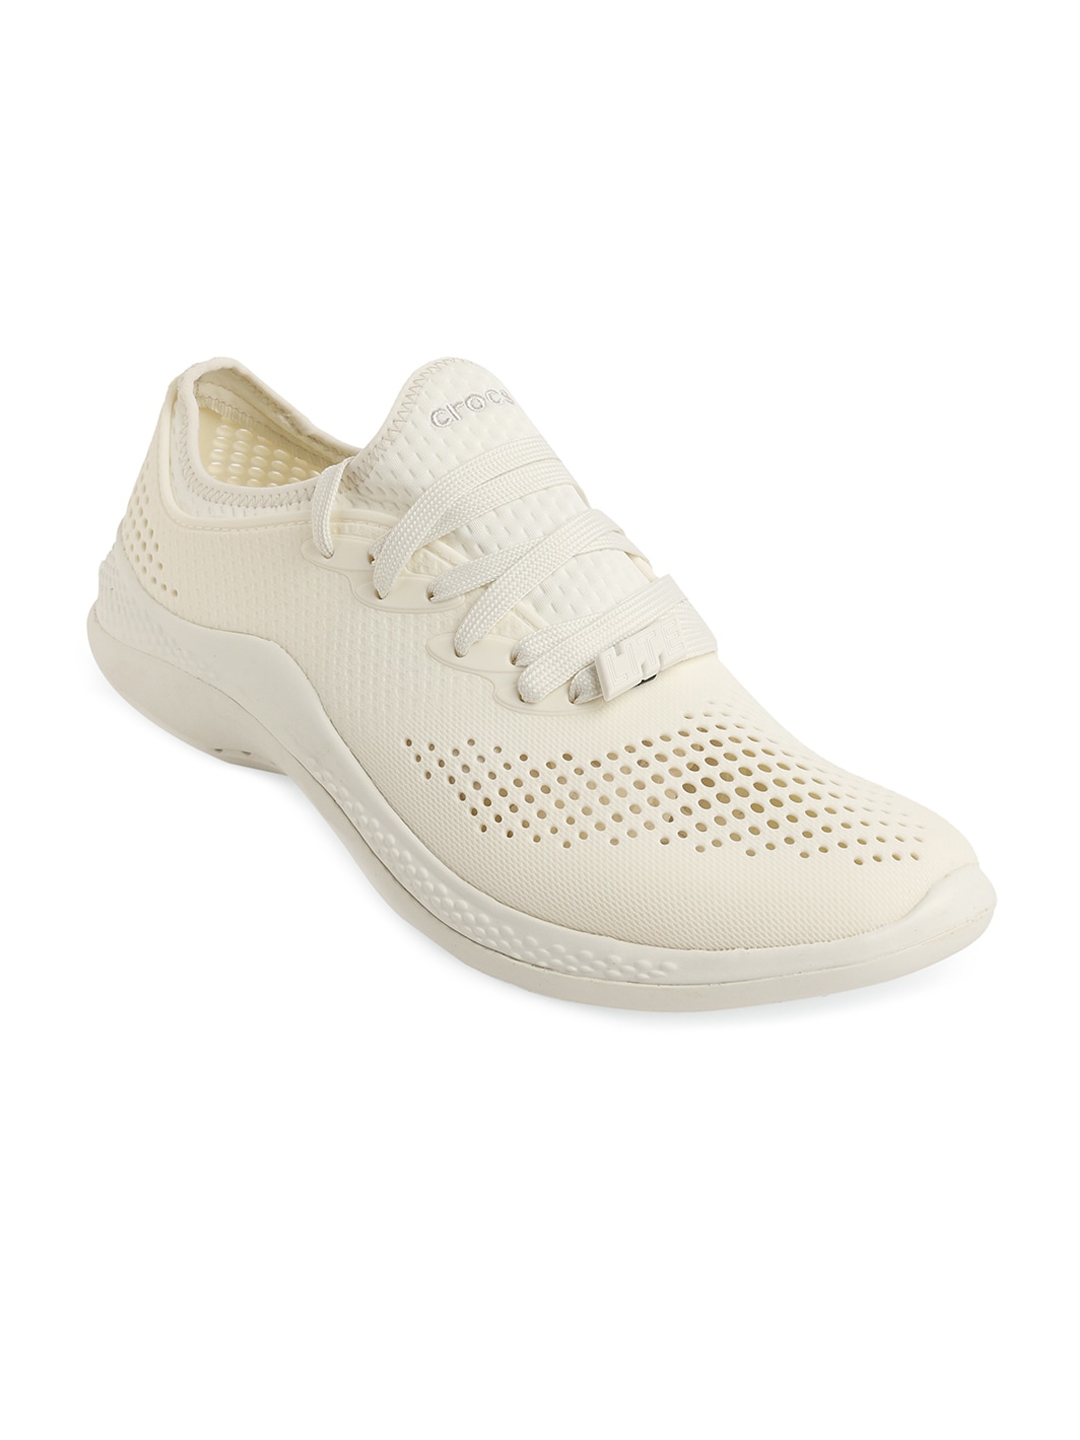 Buy Crocs Men White Perforated Sneakers - Casual Shoes for Men 17795930 ...